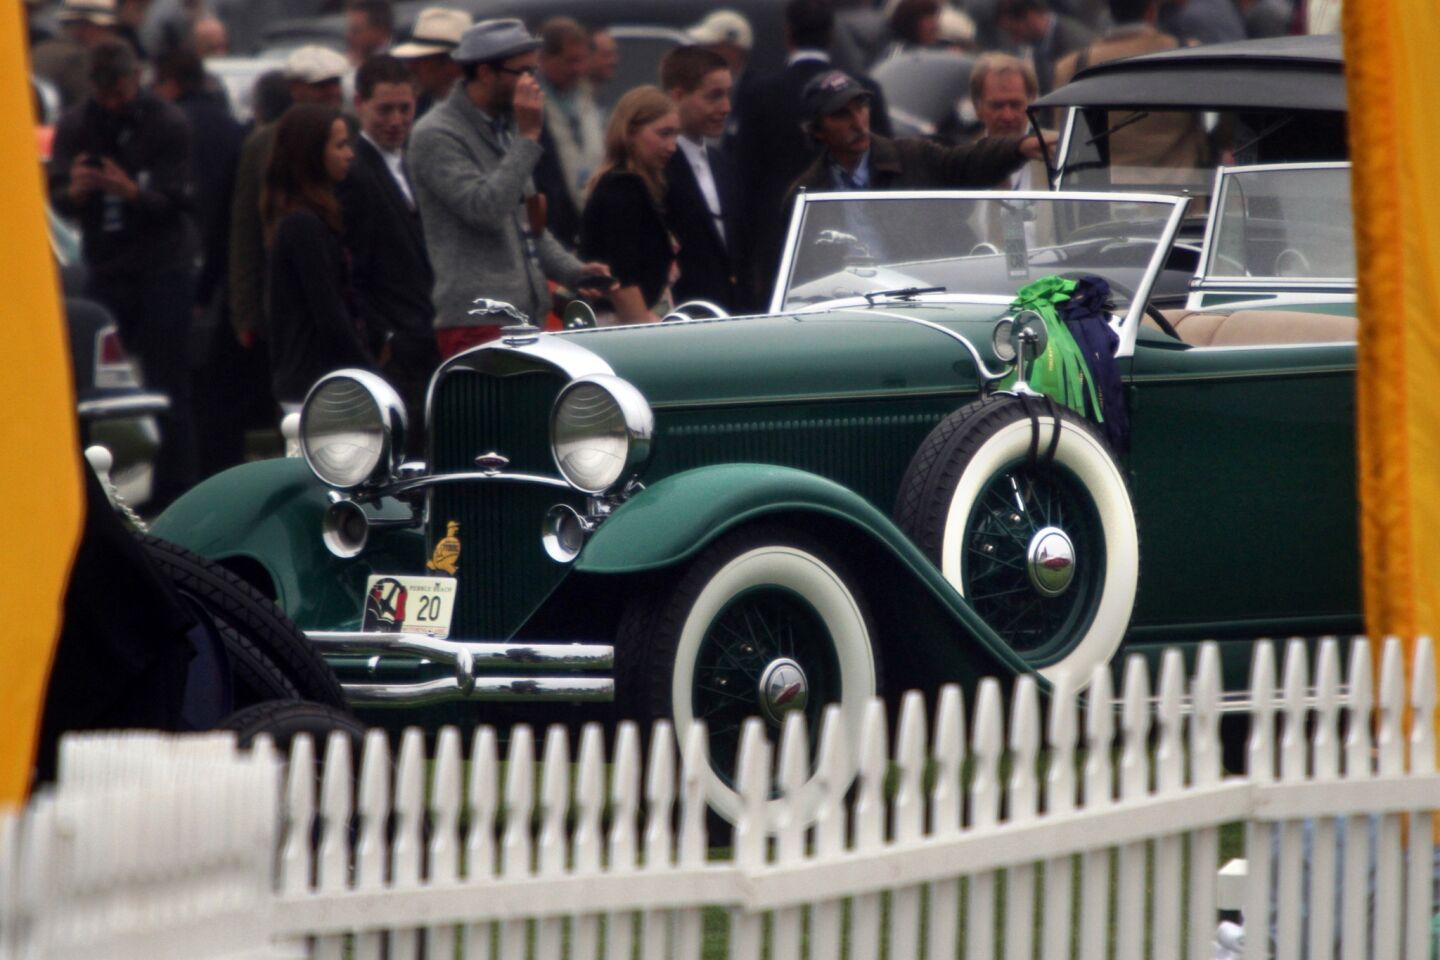 The 2013 Concours d'Elegance